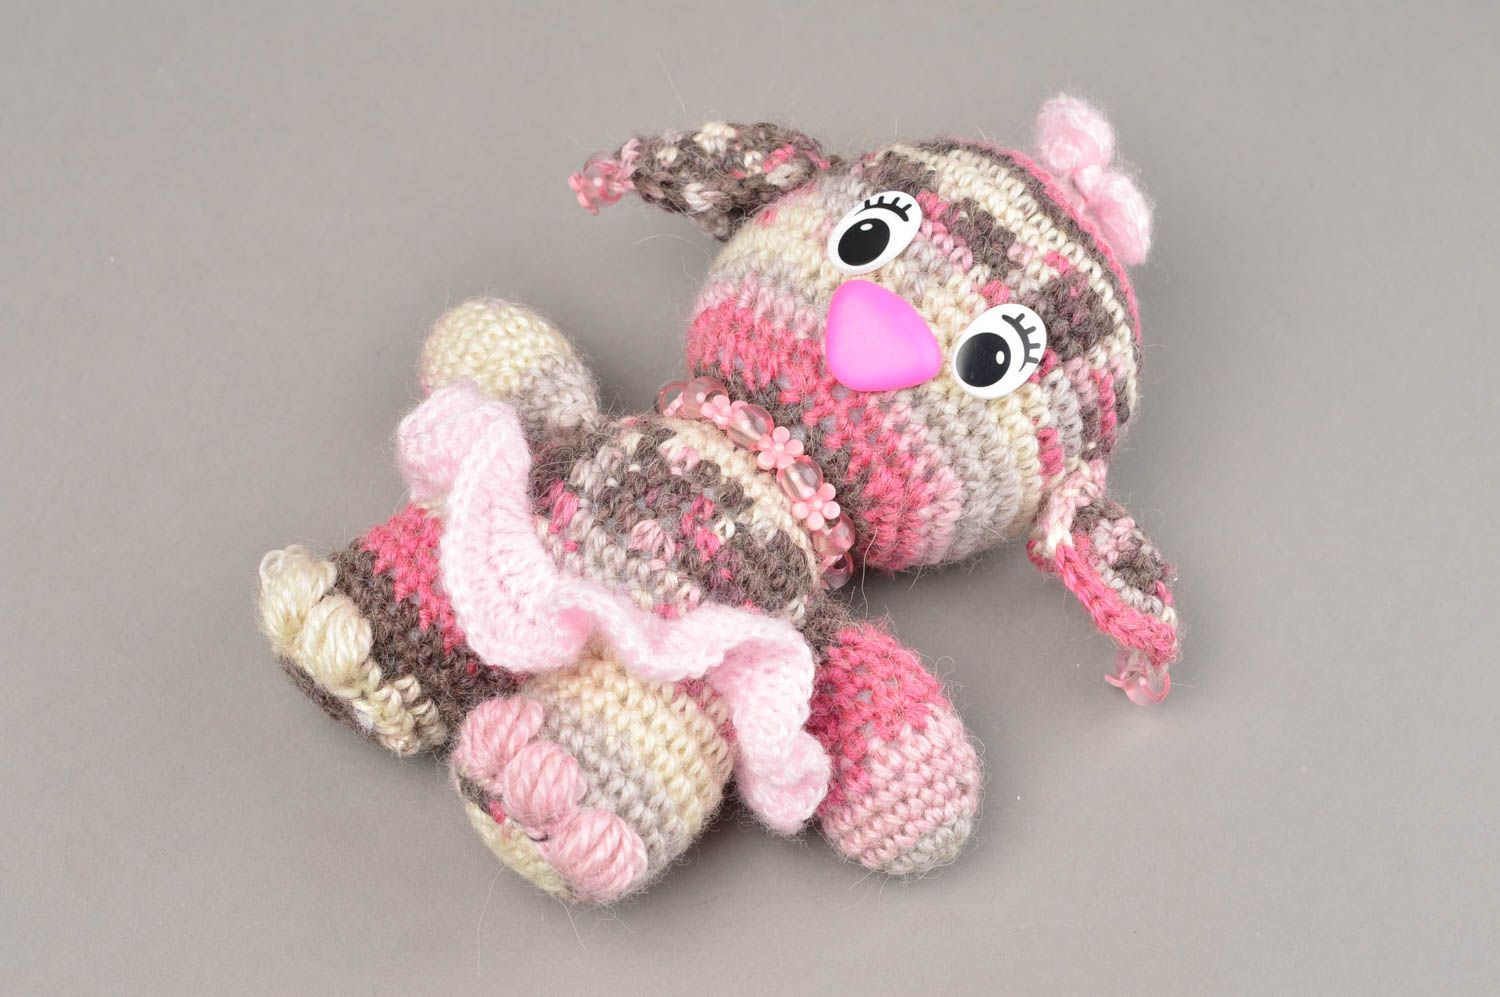 Handmade pink soft toy crocheted beautiful souvenir unusual present for kids photo 2